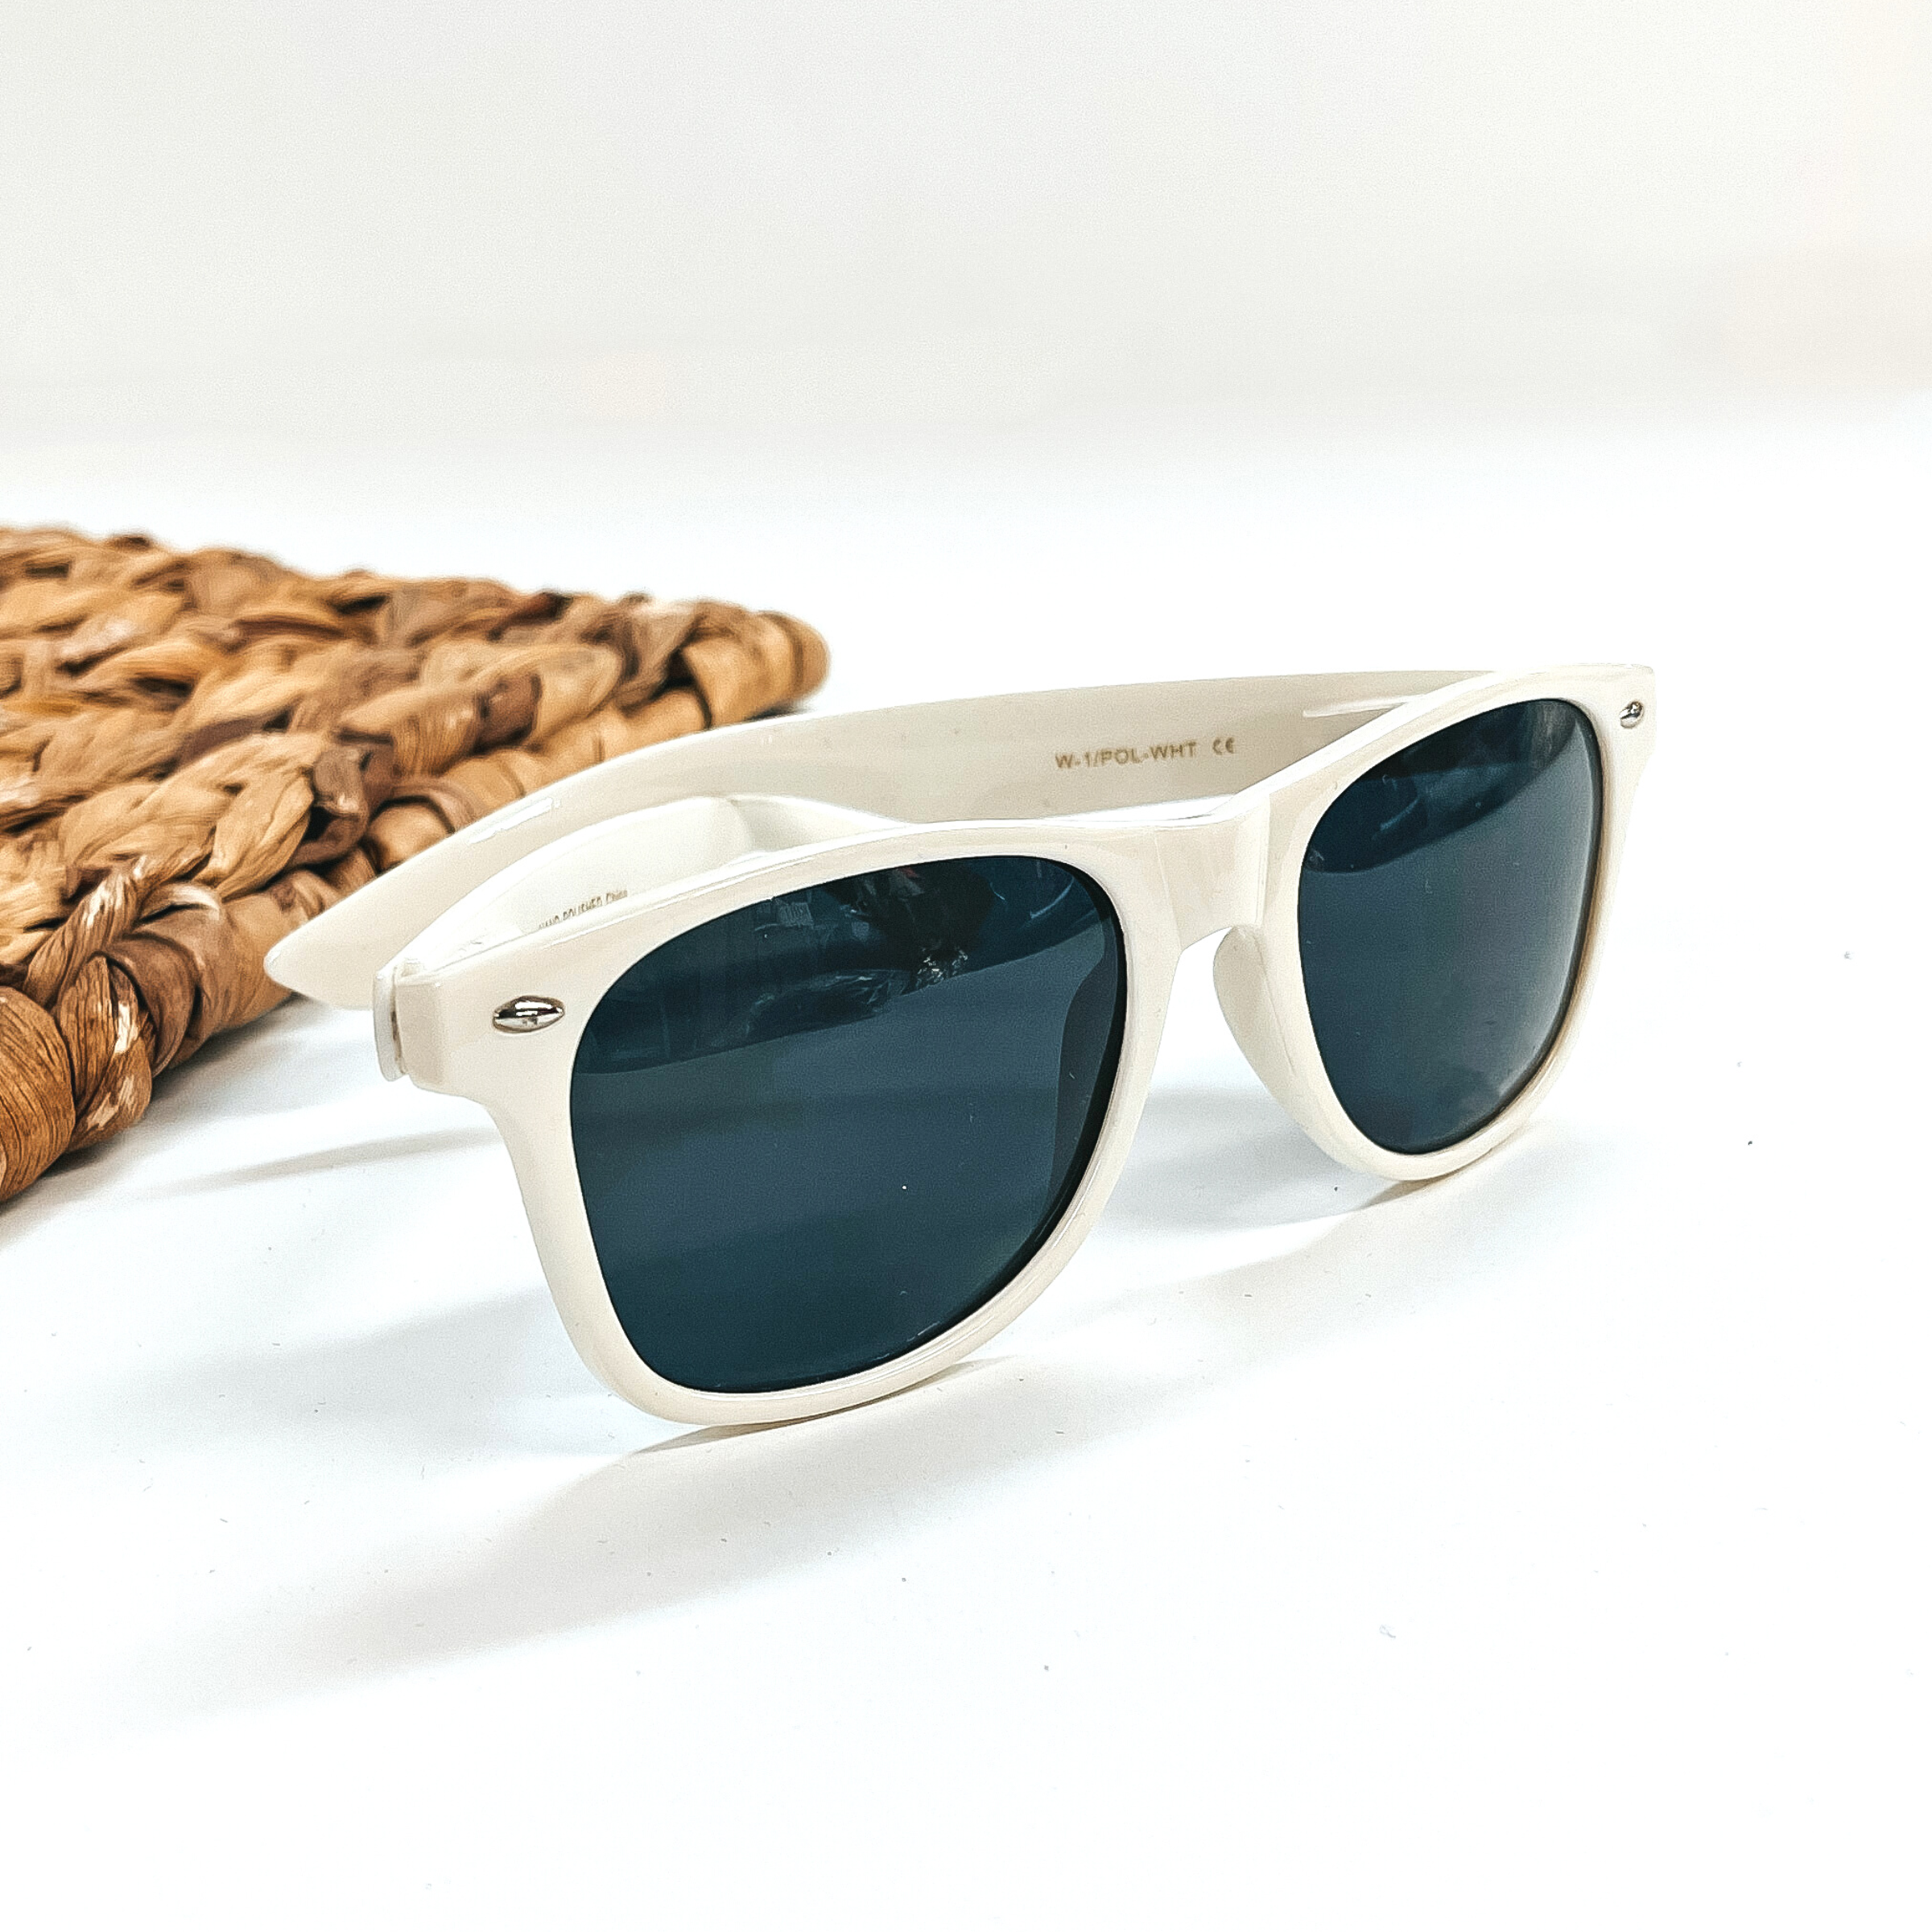 This is a white frame round sunglasses with a black/dark grey lense with small silver  detailing. This pair of sunglasses are taken on a white background with a brown  woven slate in the side as decor.